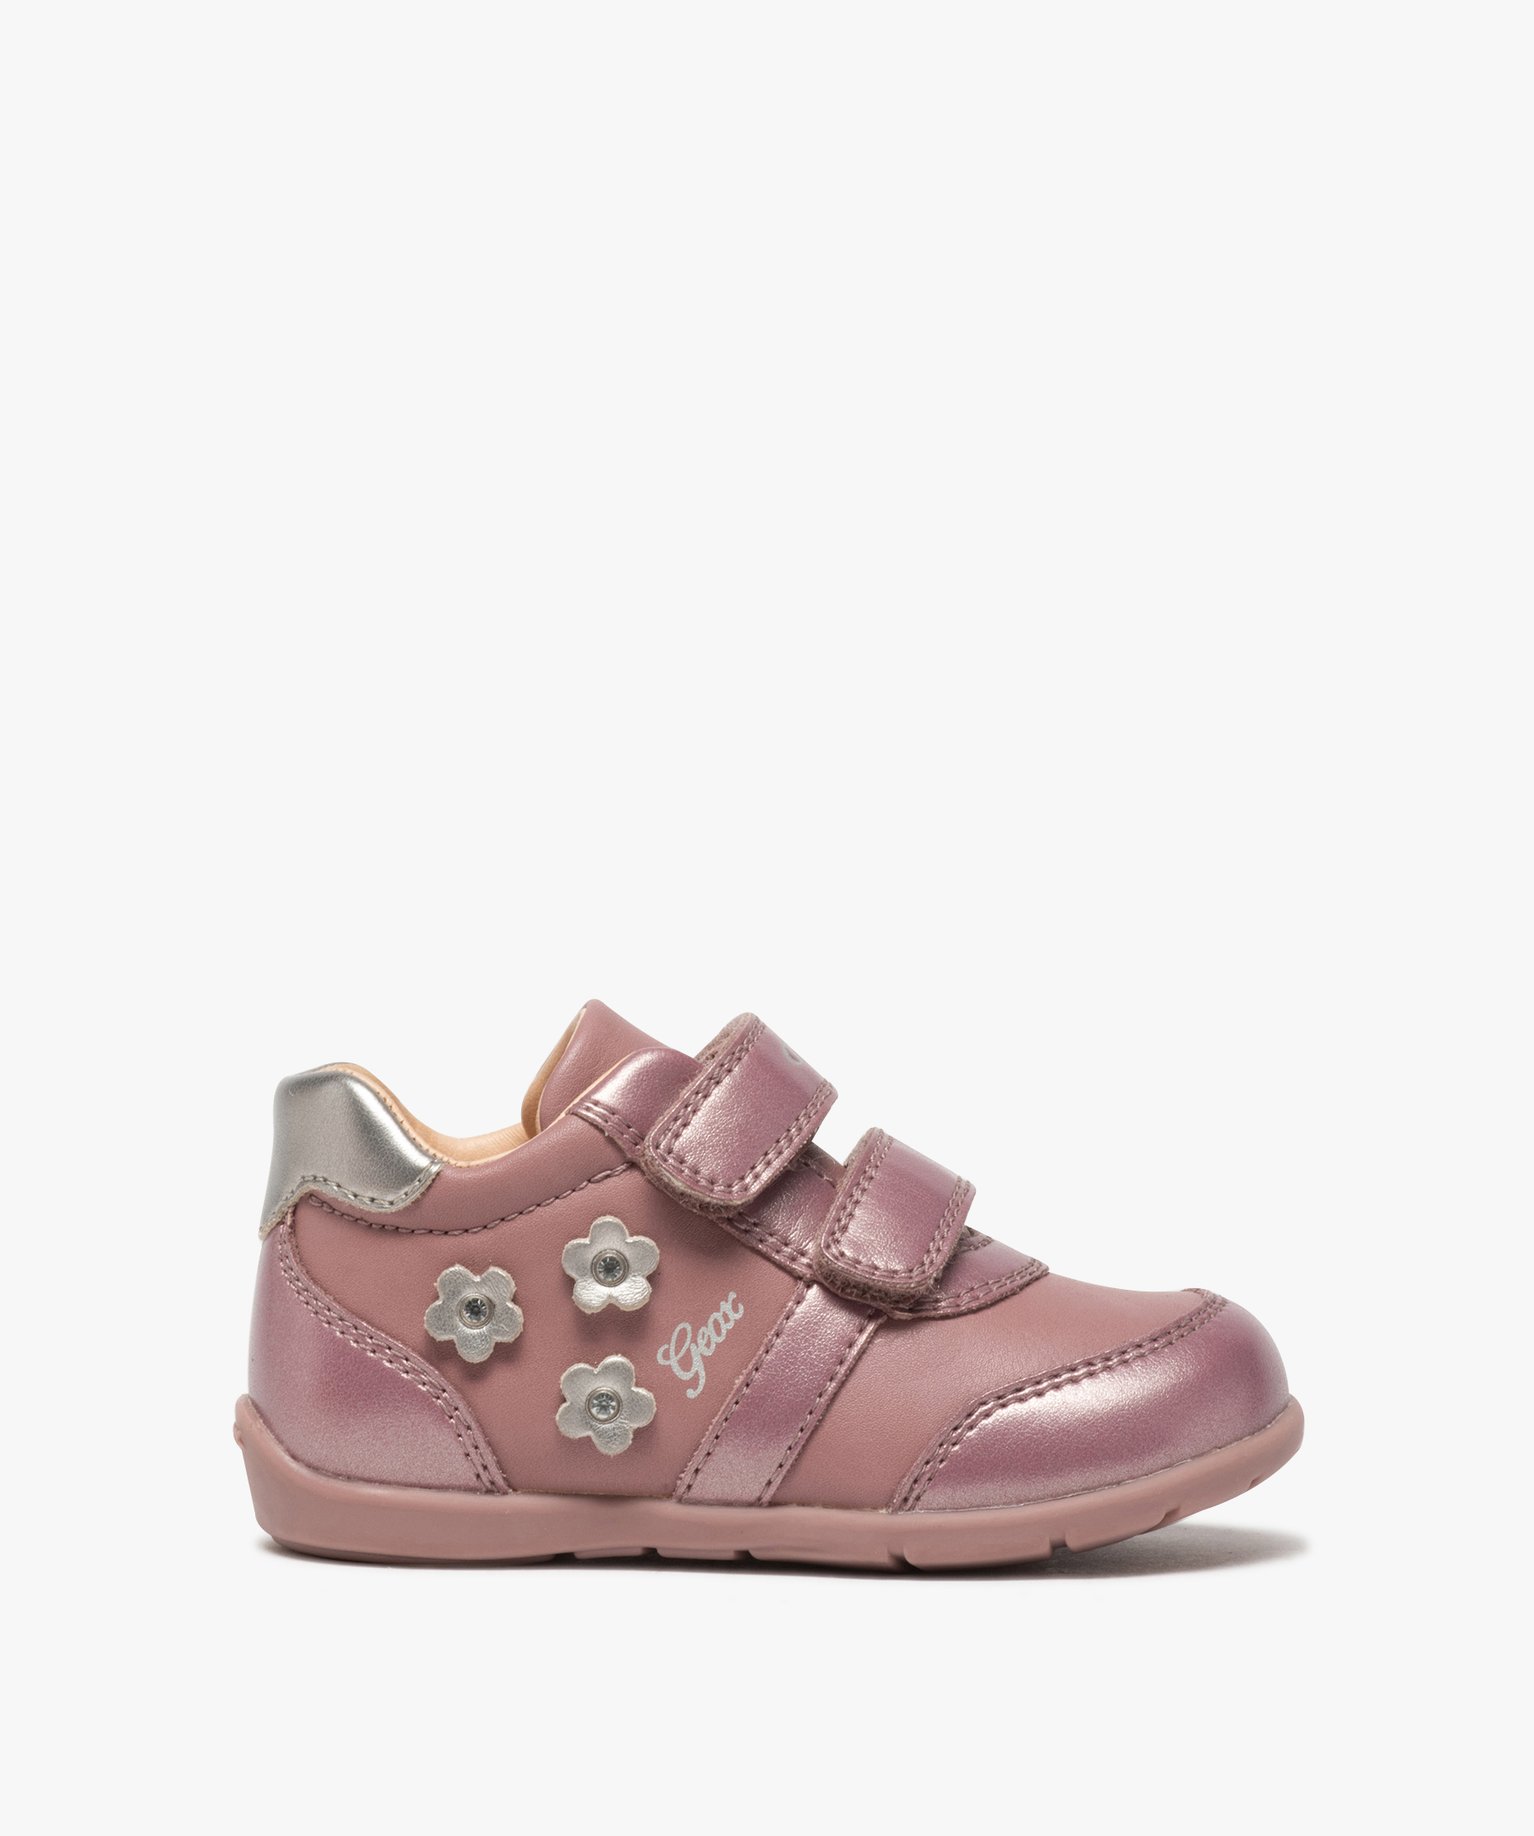 Gemo chaussures fille chaussures fille decor fleurs - geox rose bebe | GÉMO